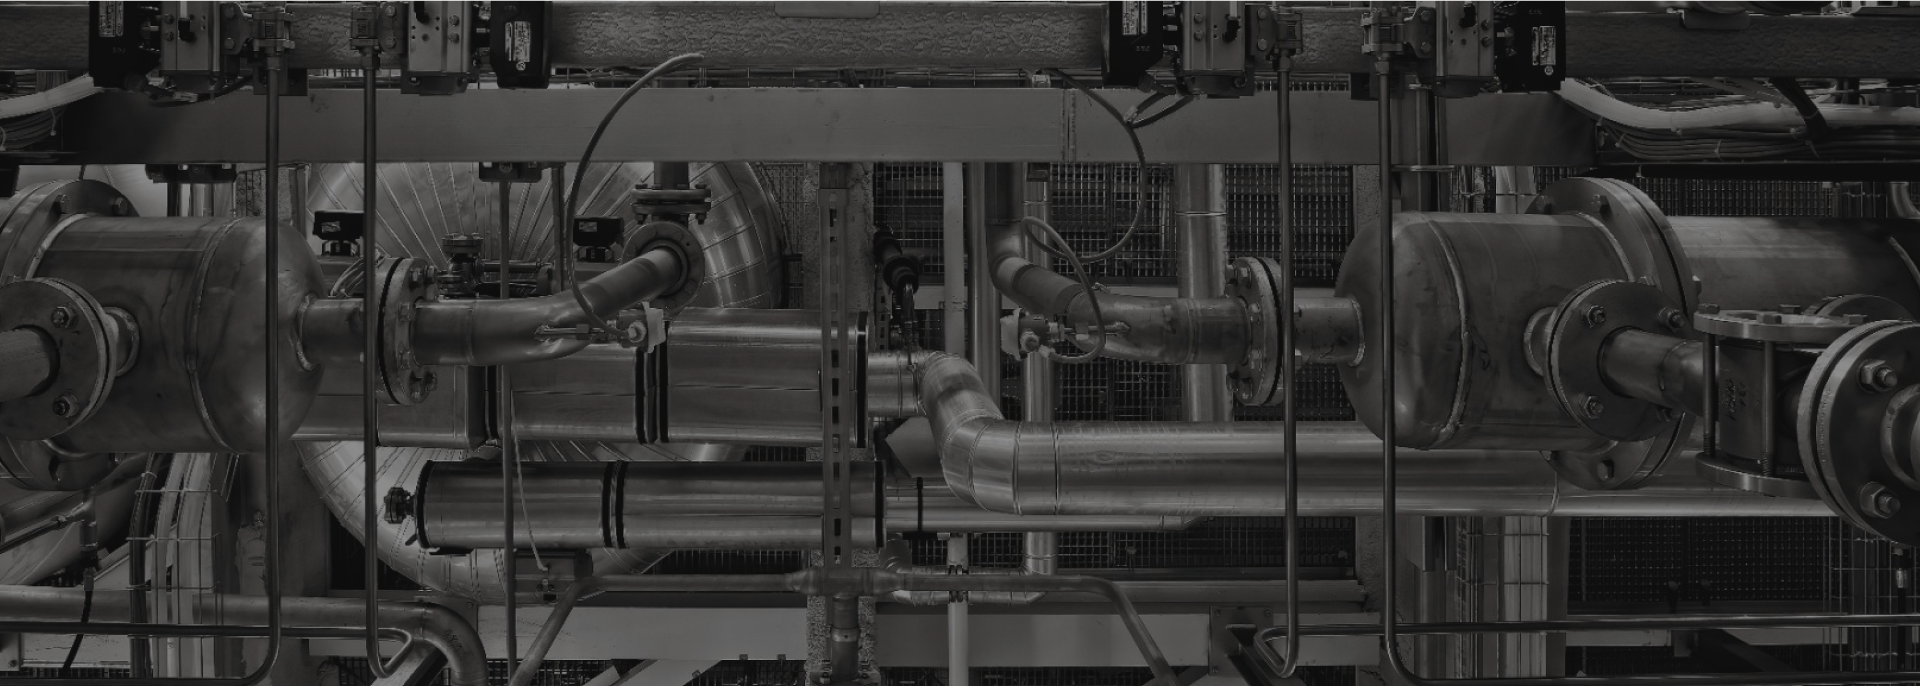 A complex network of industrial metal pipes and machinery, including valves and fittings, forms an intricate system. The pipes intersect and connect at various points, and wires are visible hanging throughout the structure. The image is monochromatic.